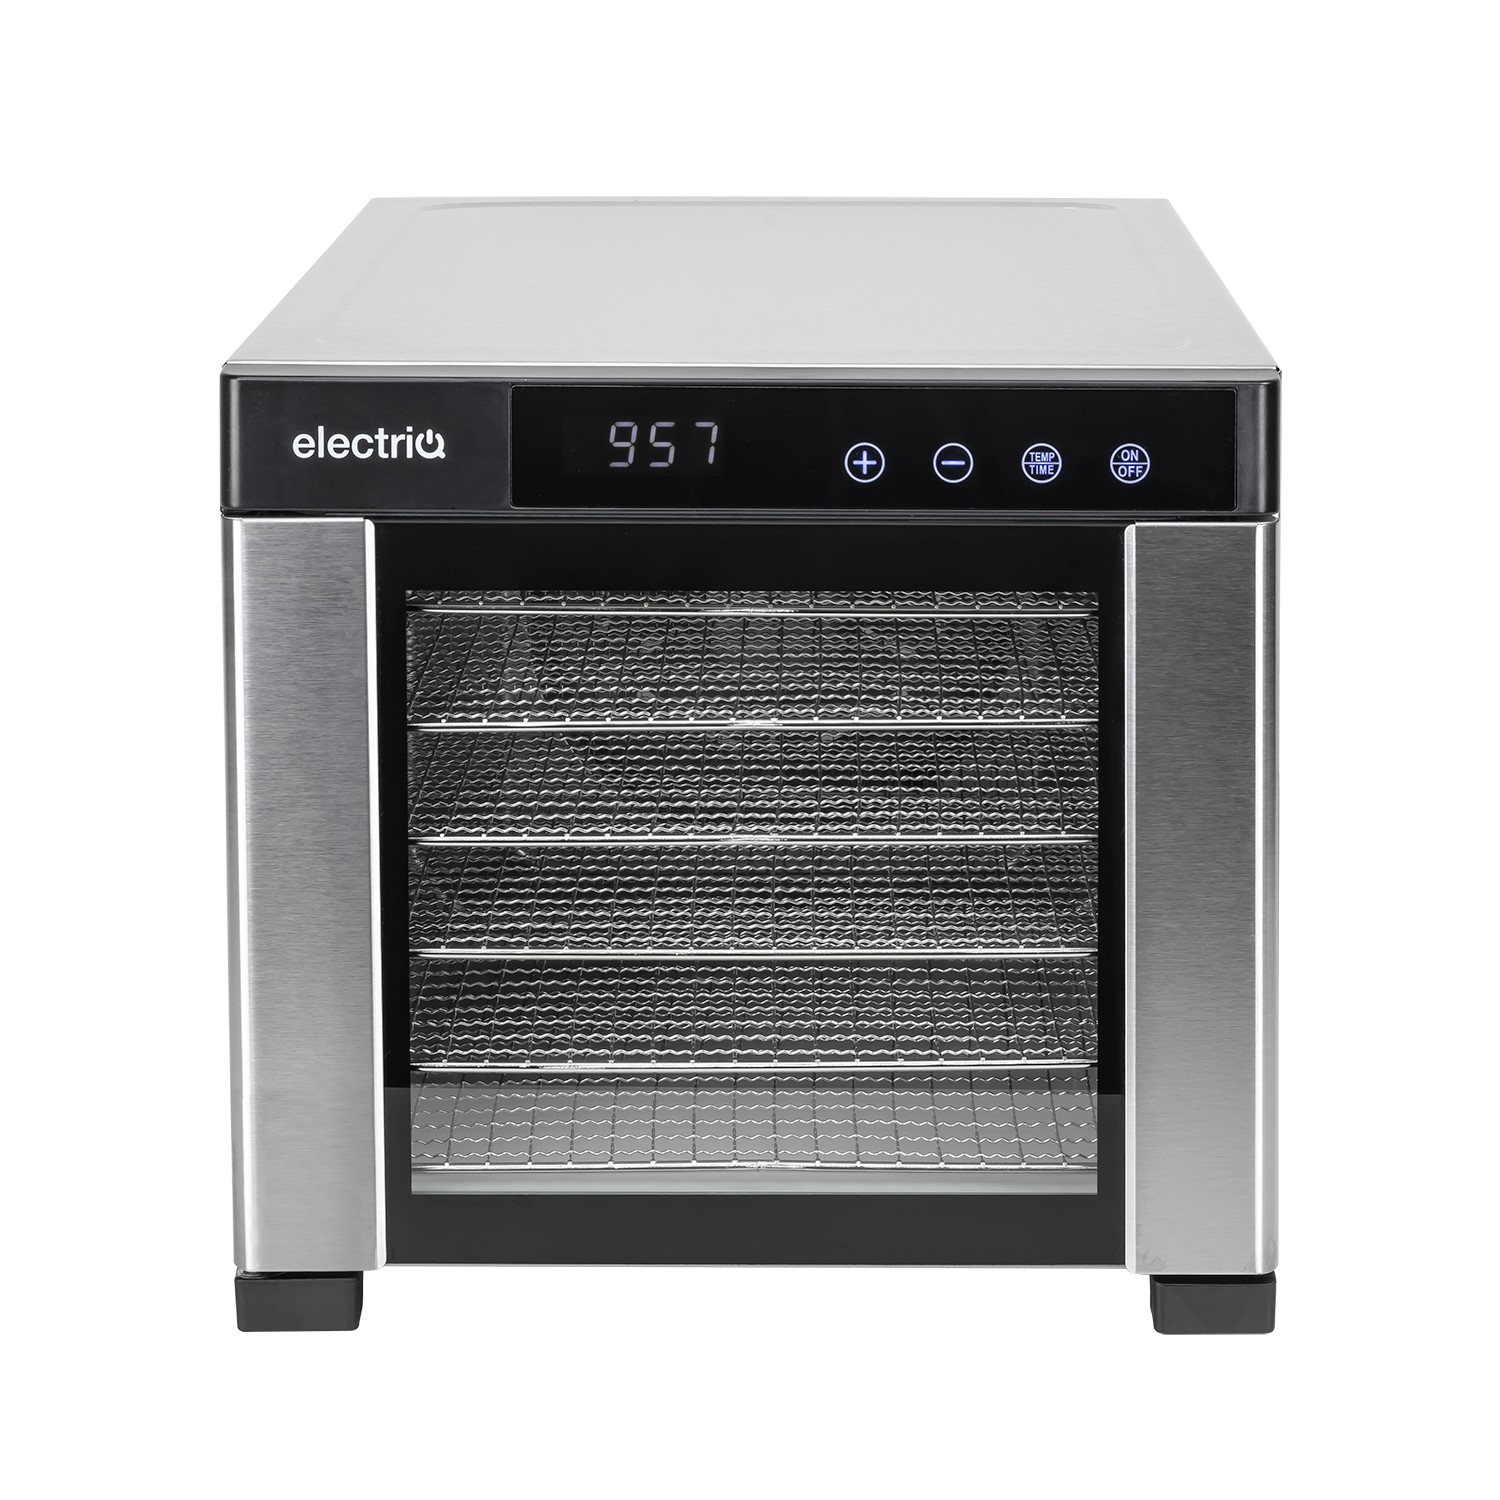 electriQ Digital Food Dehydrator & Dryer with 6 Shelves and 48 Hour Timer - Stainless Steel